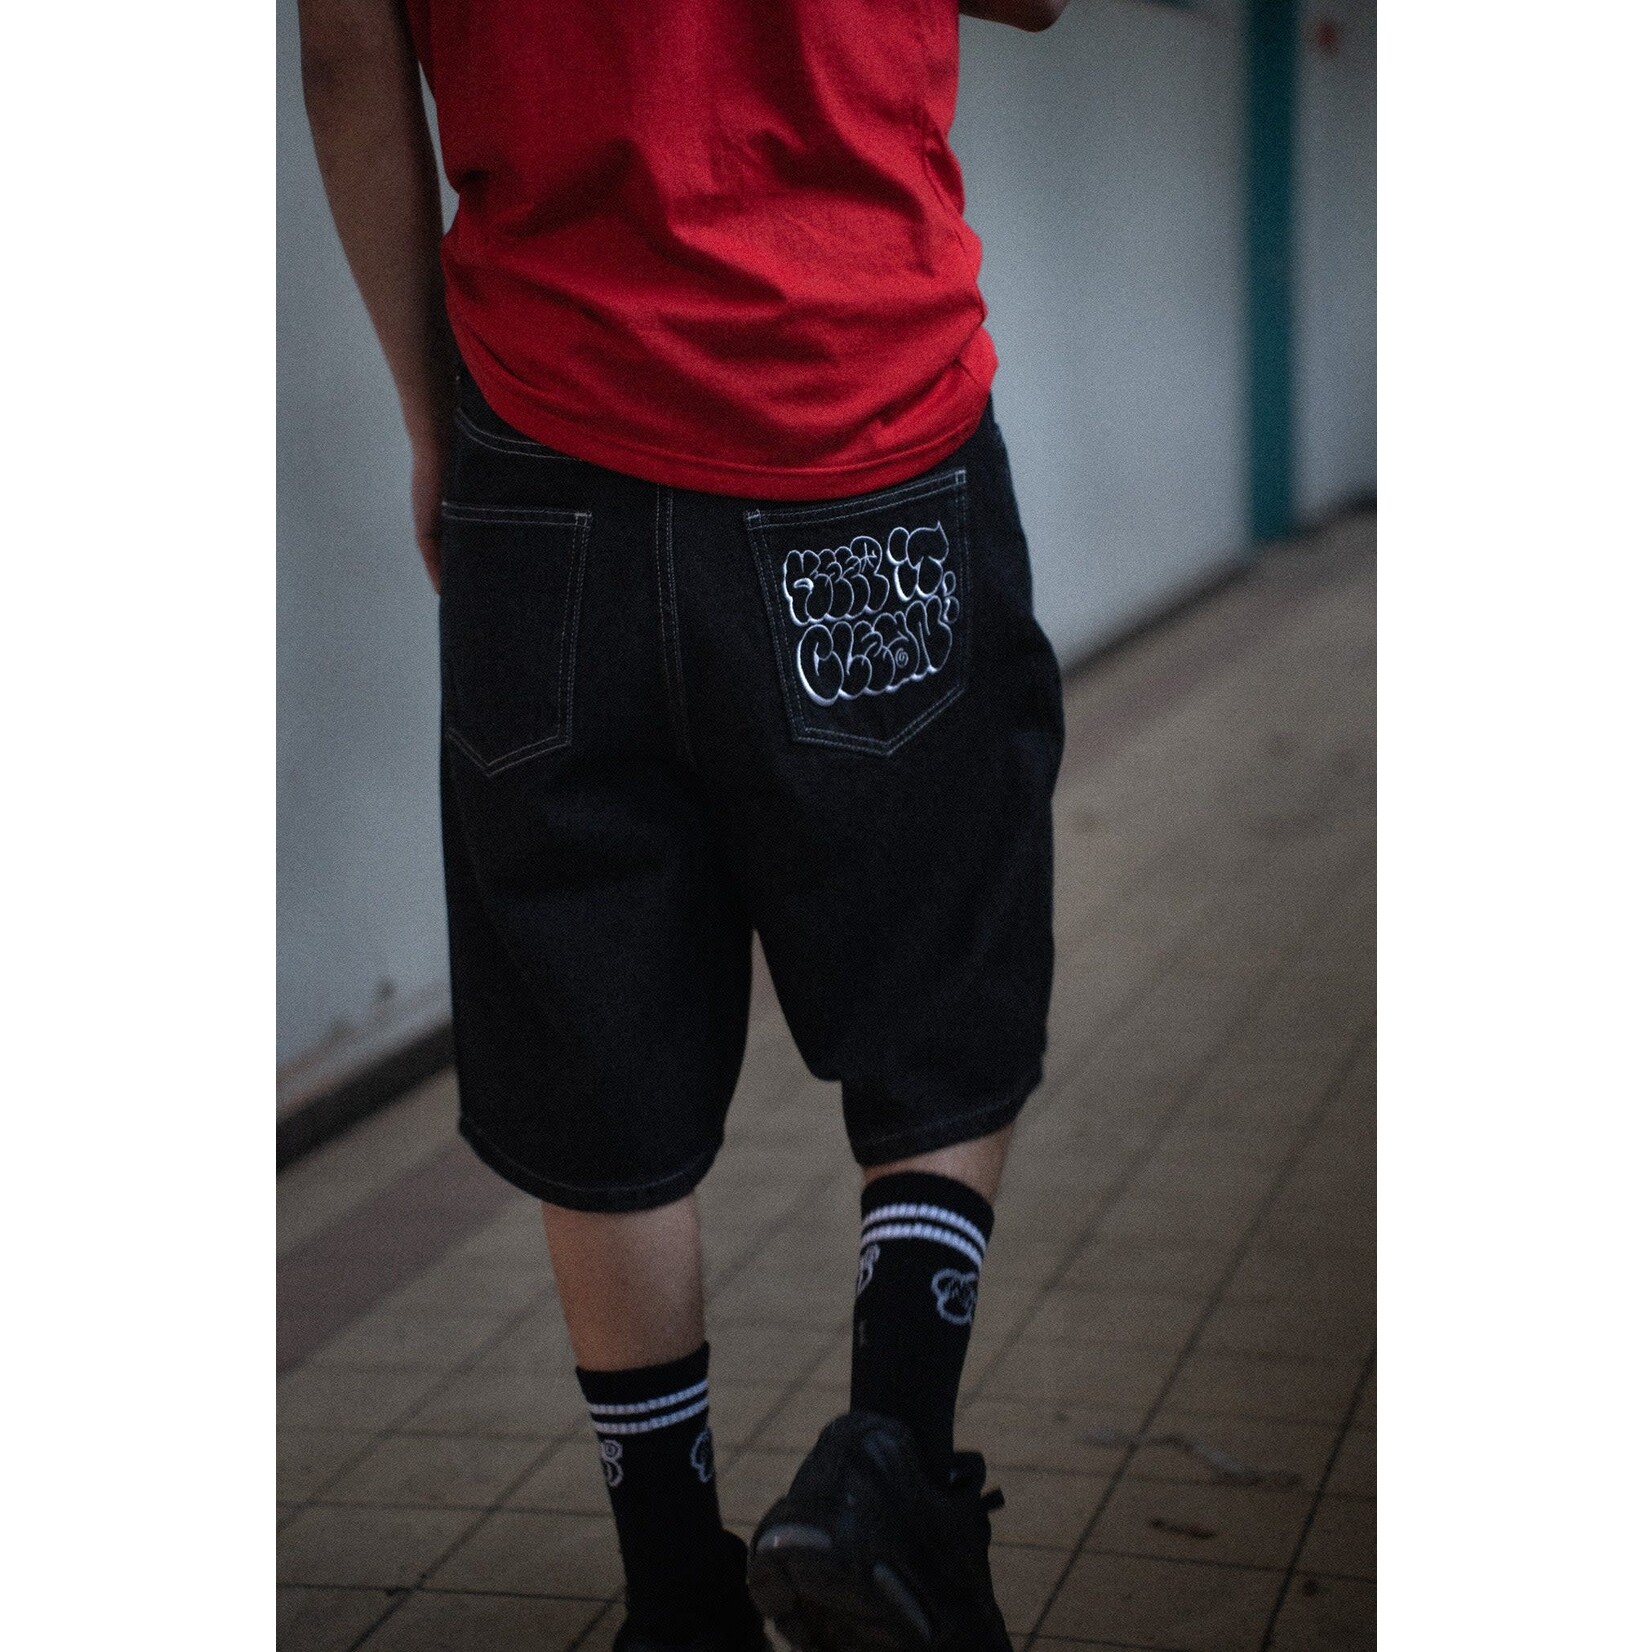 KEEP IT CLEAN KEEP IT CLEAN LOOSE SHORT - THROW UP - BLACK WASHED